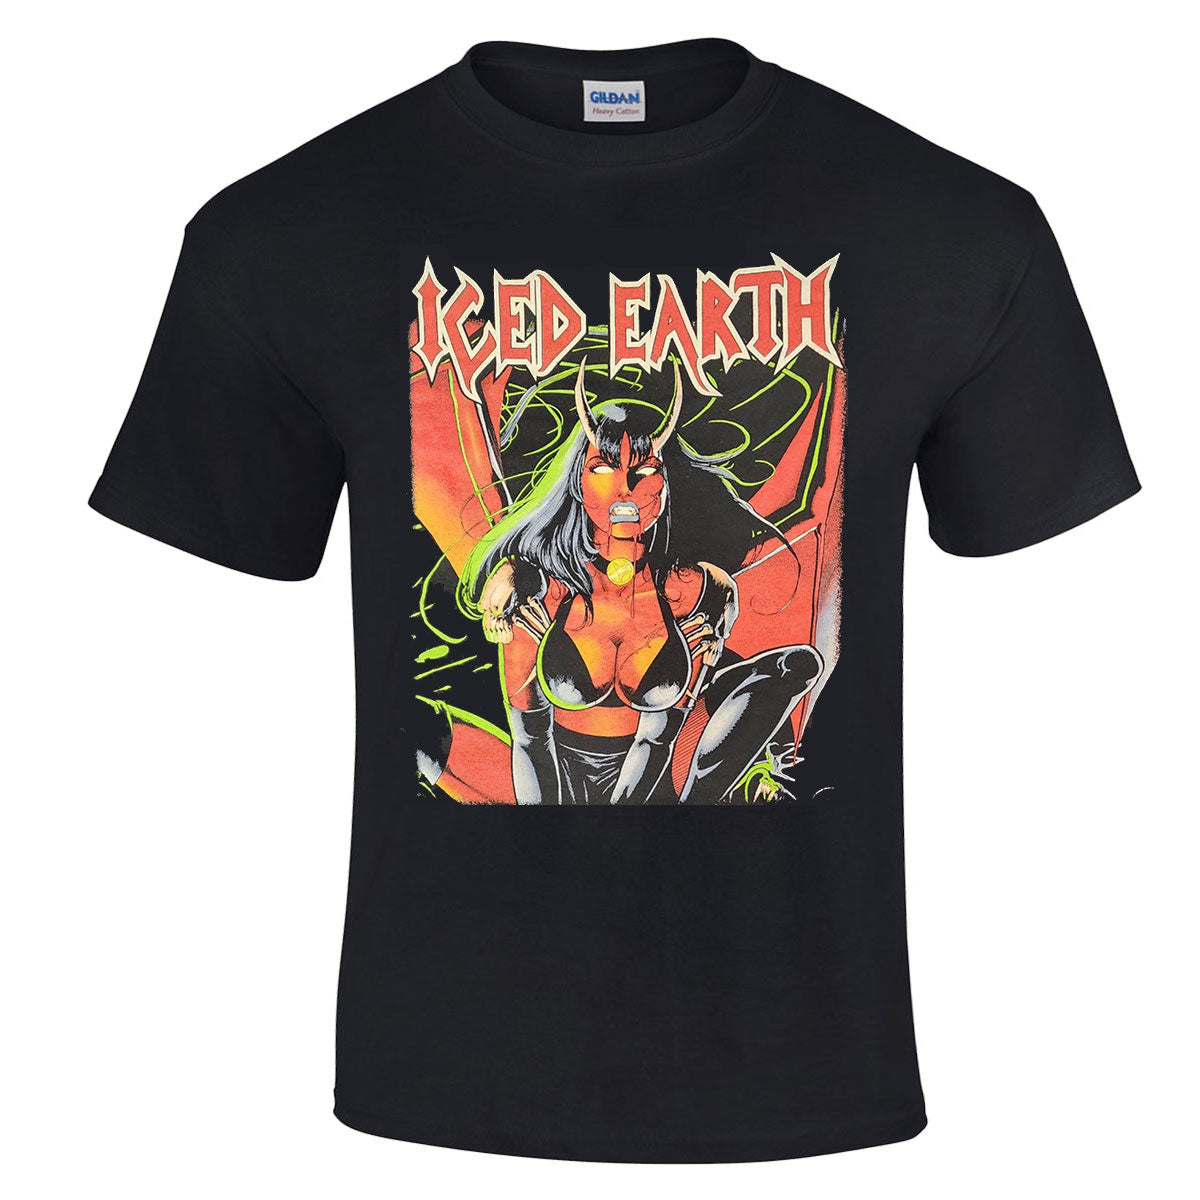 ICED EARTH Demon Chick T-Shirt